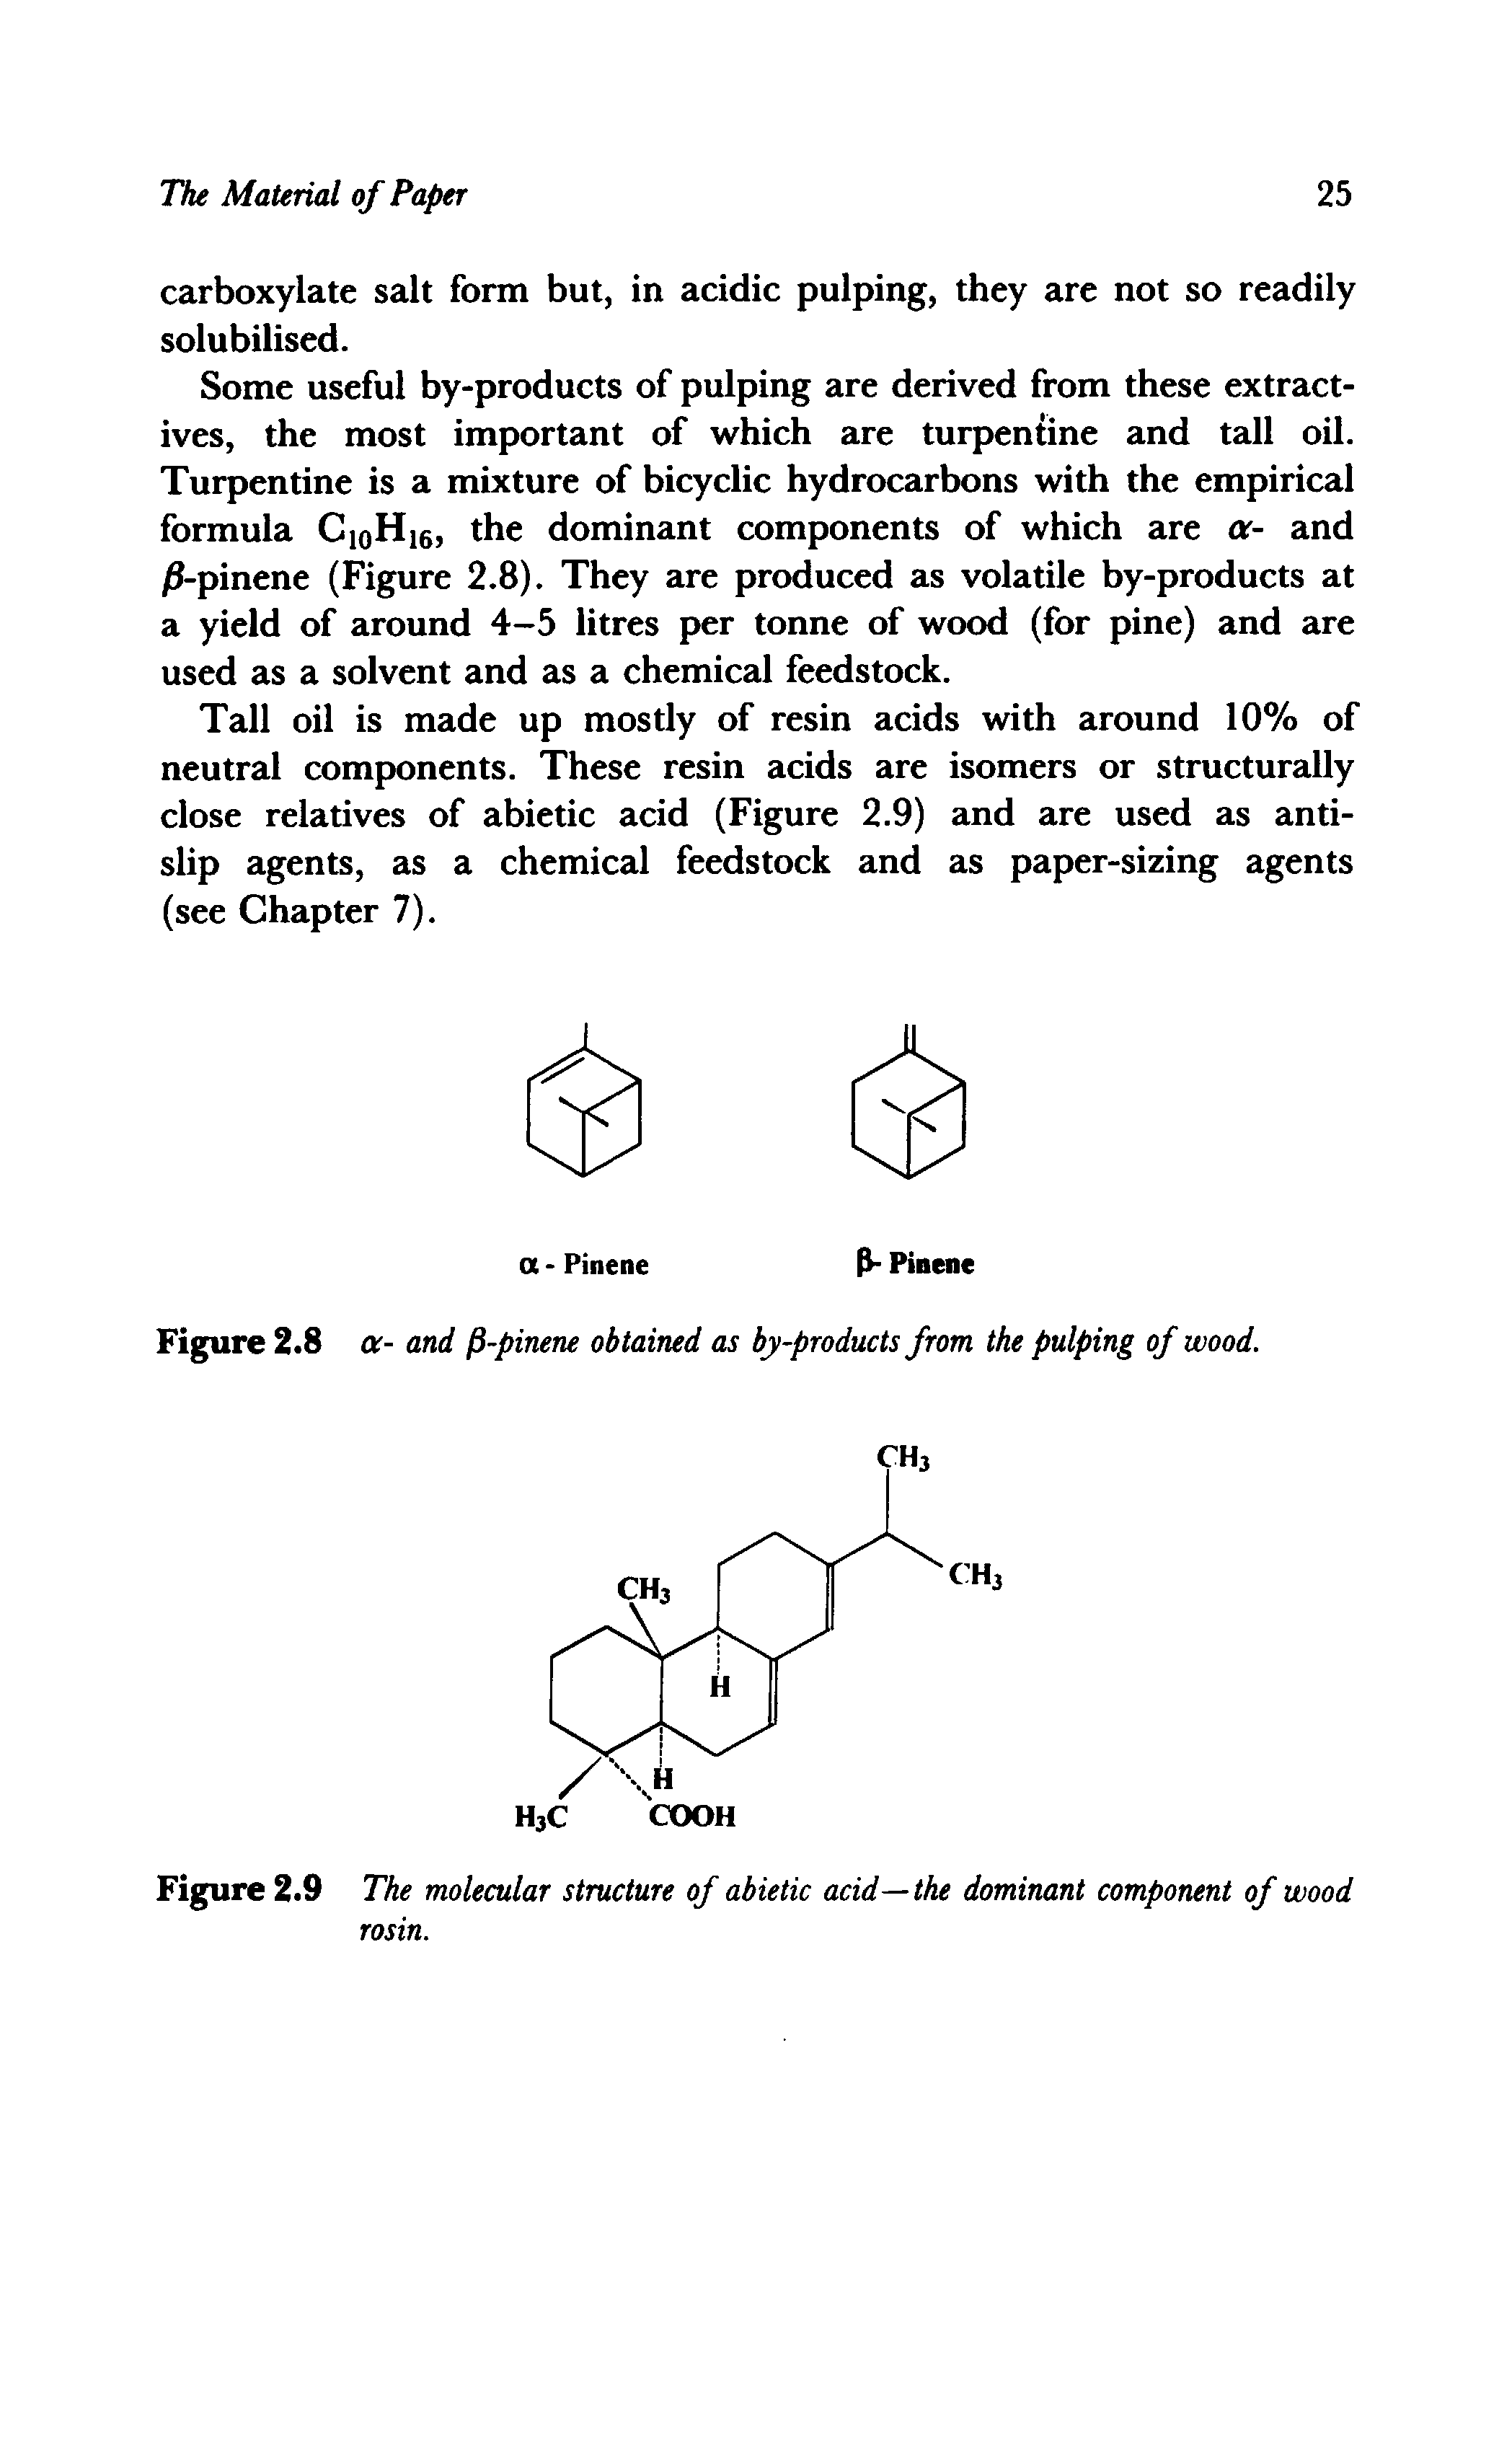 Figure 2.9 The molecular structure of abietic acid—the dominant component of wood rosin.